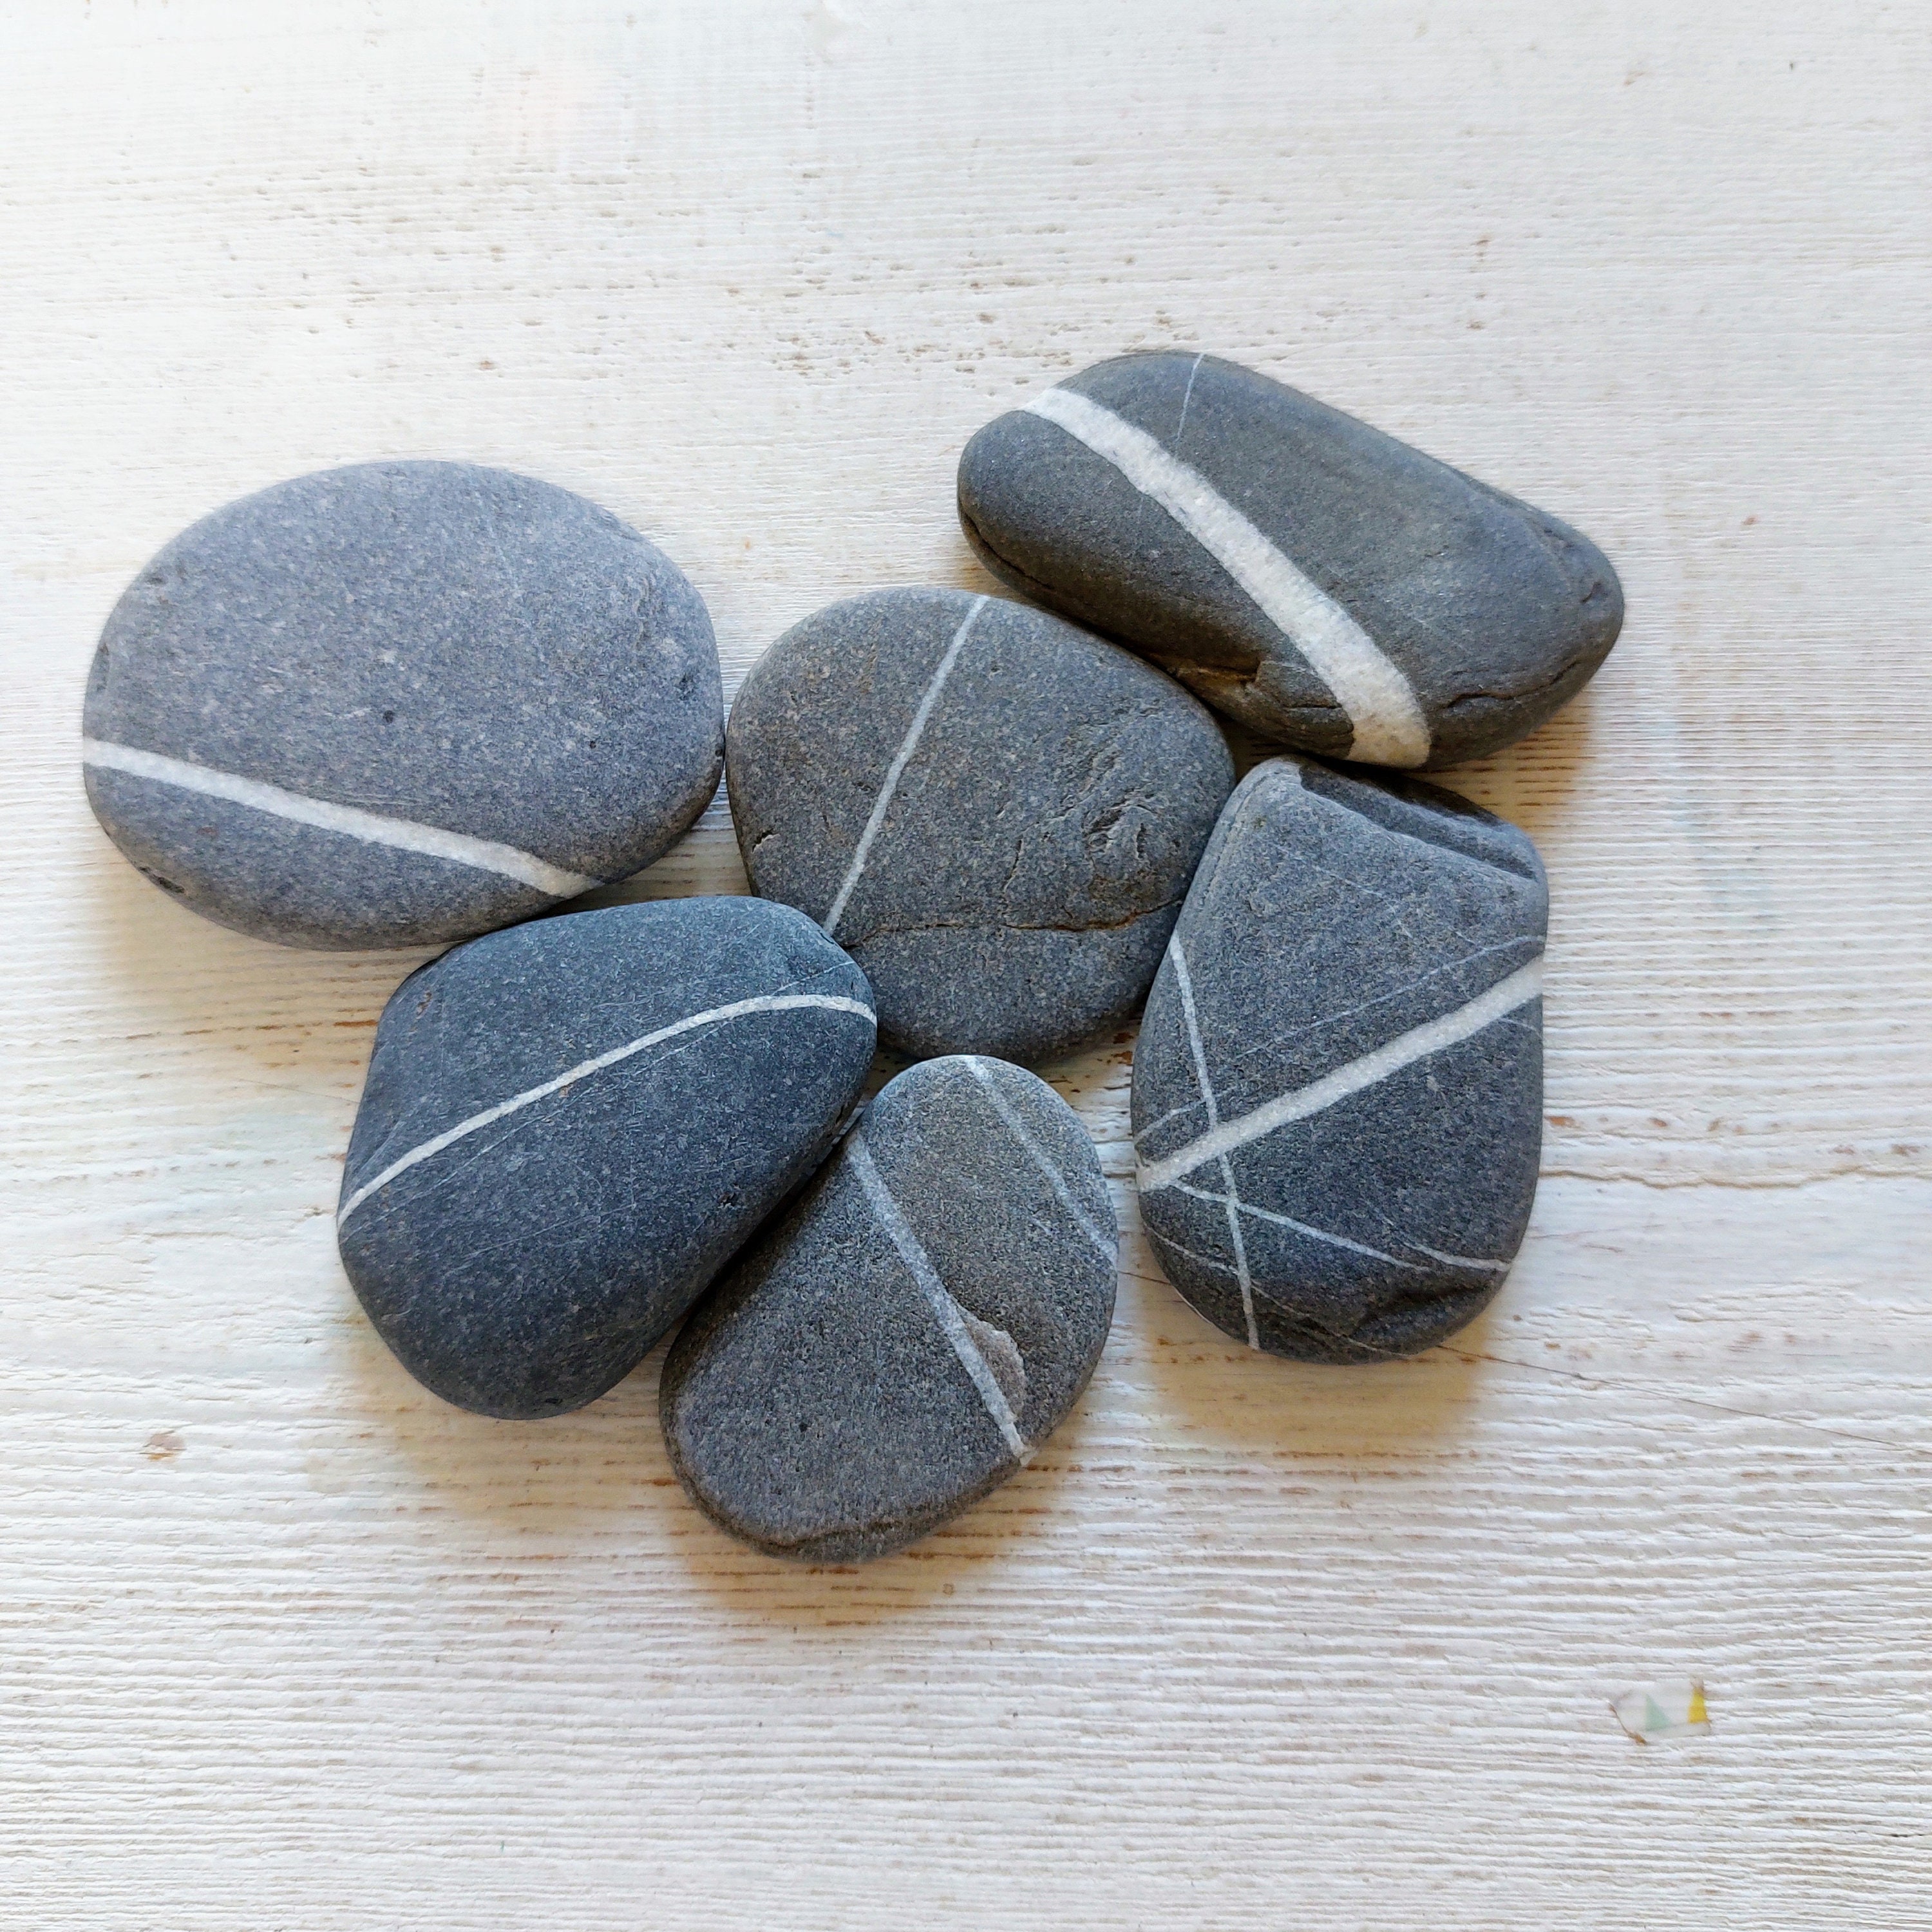 100 Grey/brown Flat Rocks, 1 Inch to 2 Inch Flat Stones, Cairn Stones,  Wedding Stone, Beach Rocks, Mother Nature, Painting Stones 